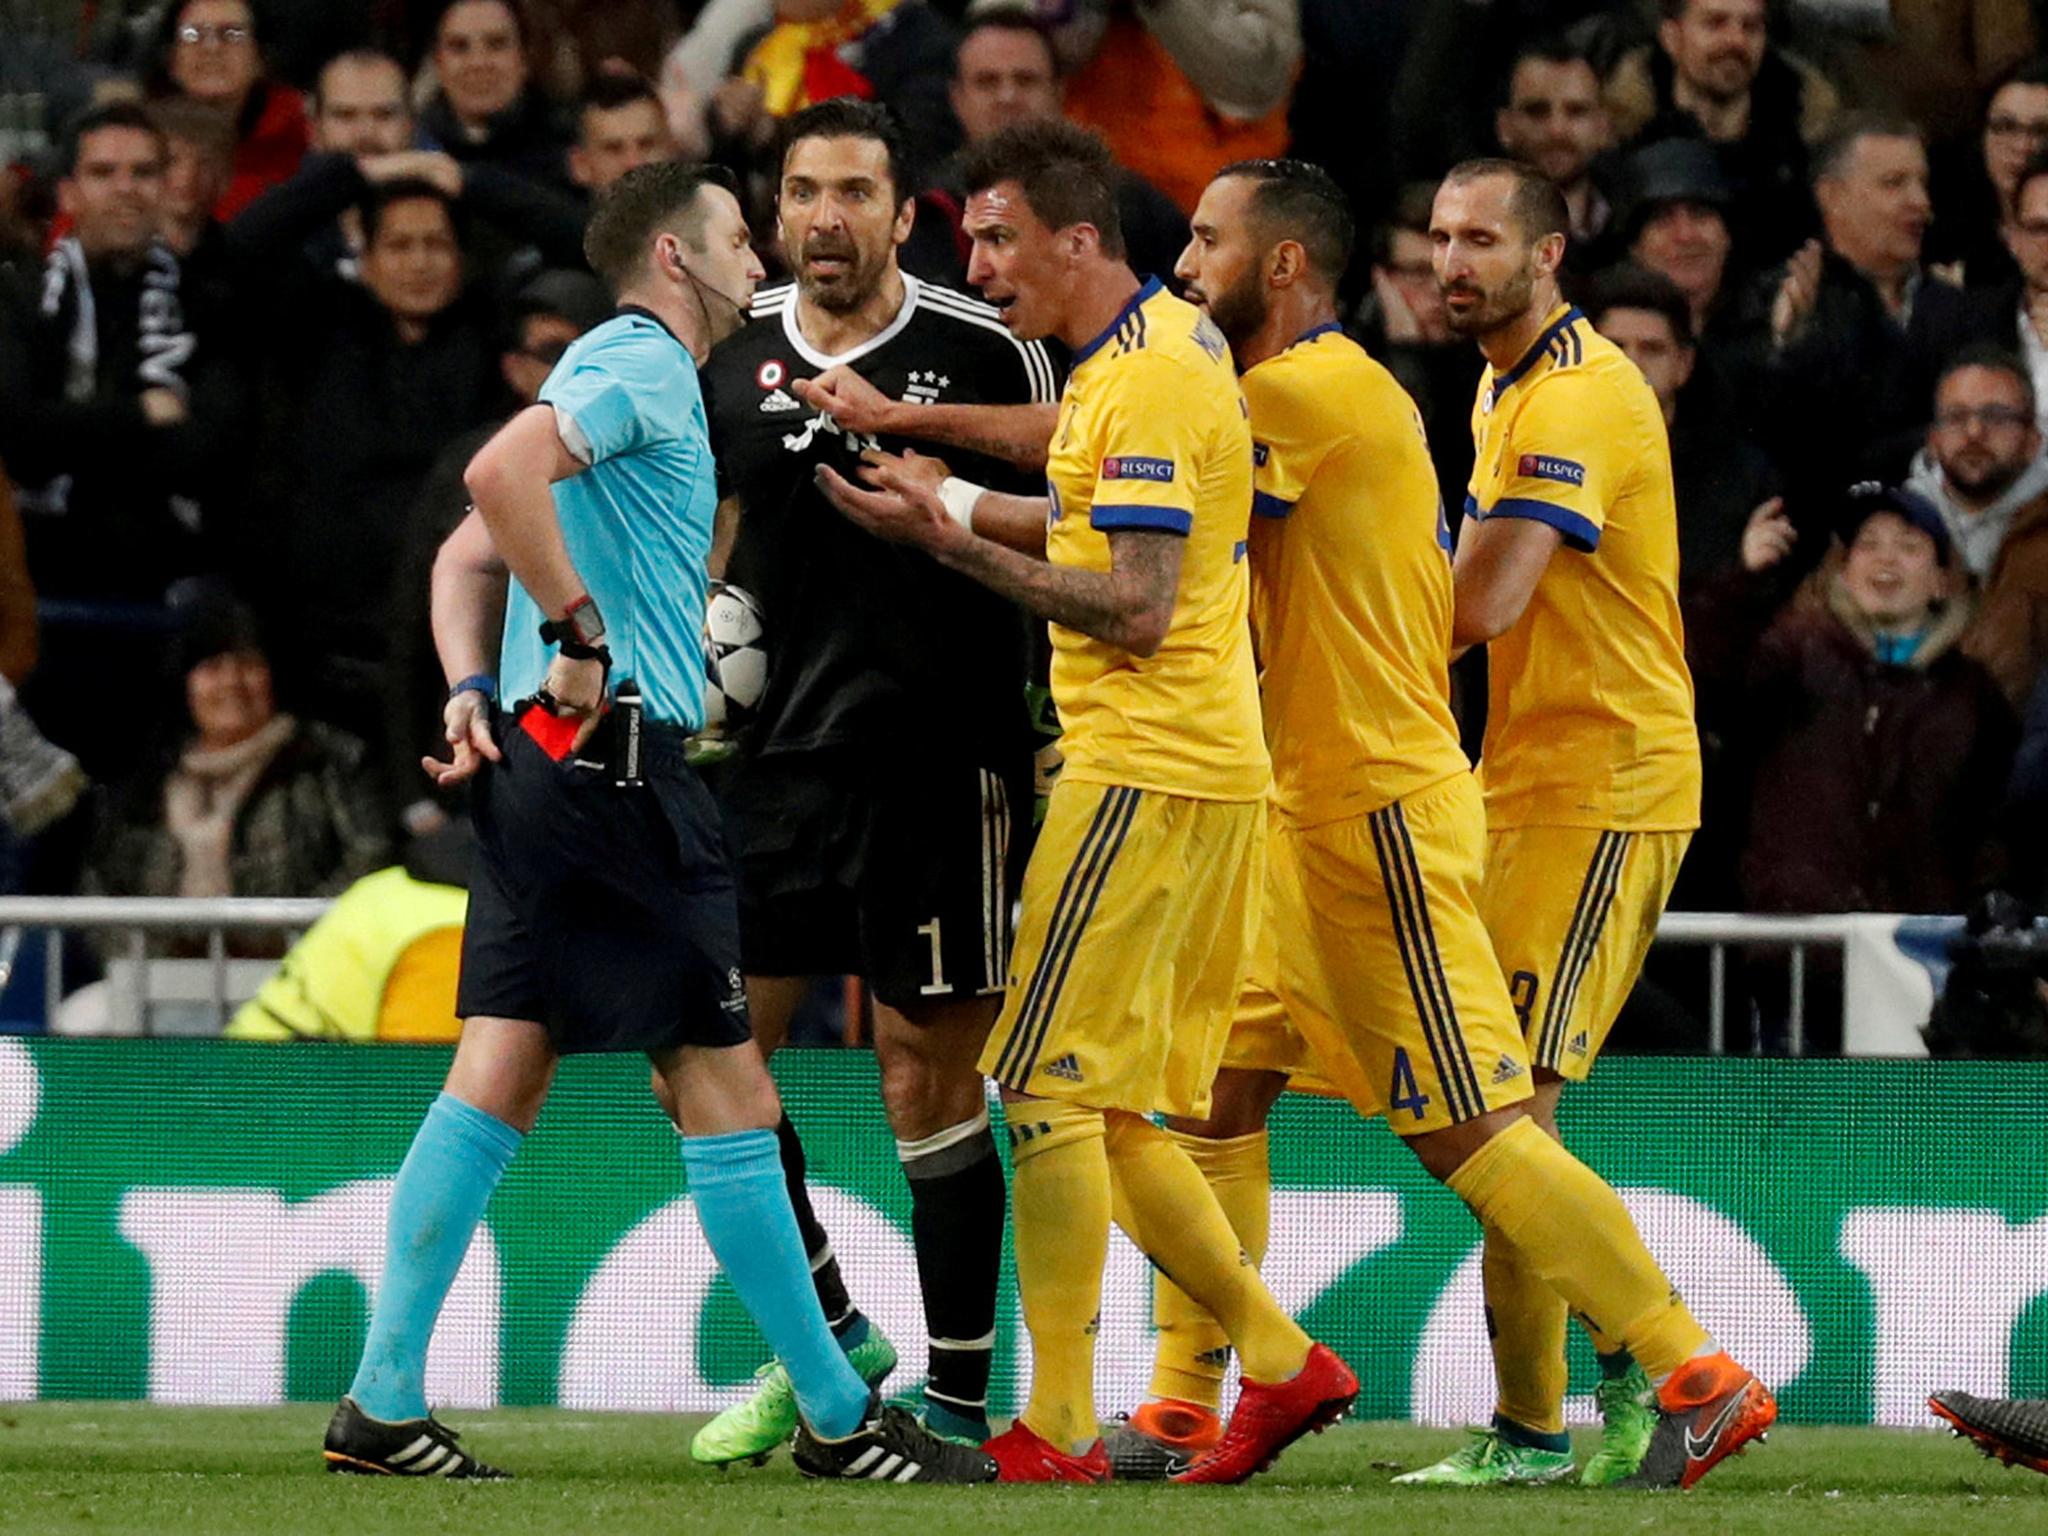 Gianluigi Buffon has apologised to referee Michael Oliver for his comments after the Champions League quarter-final